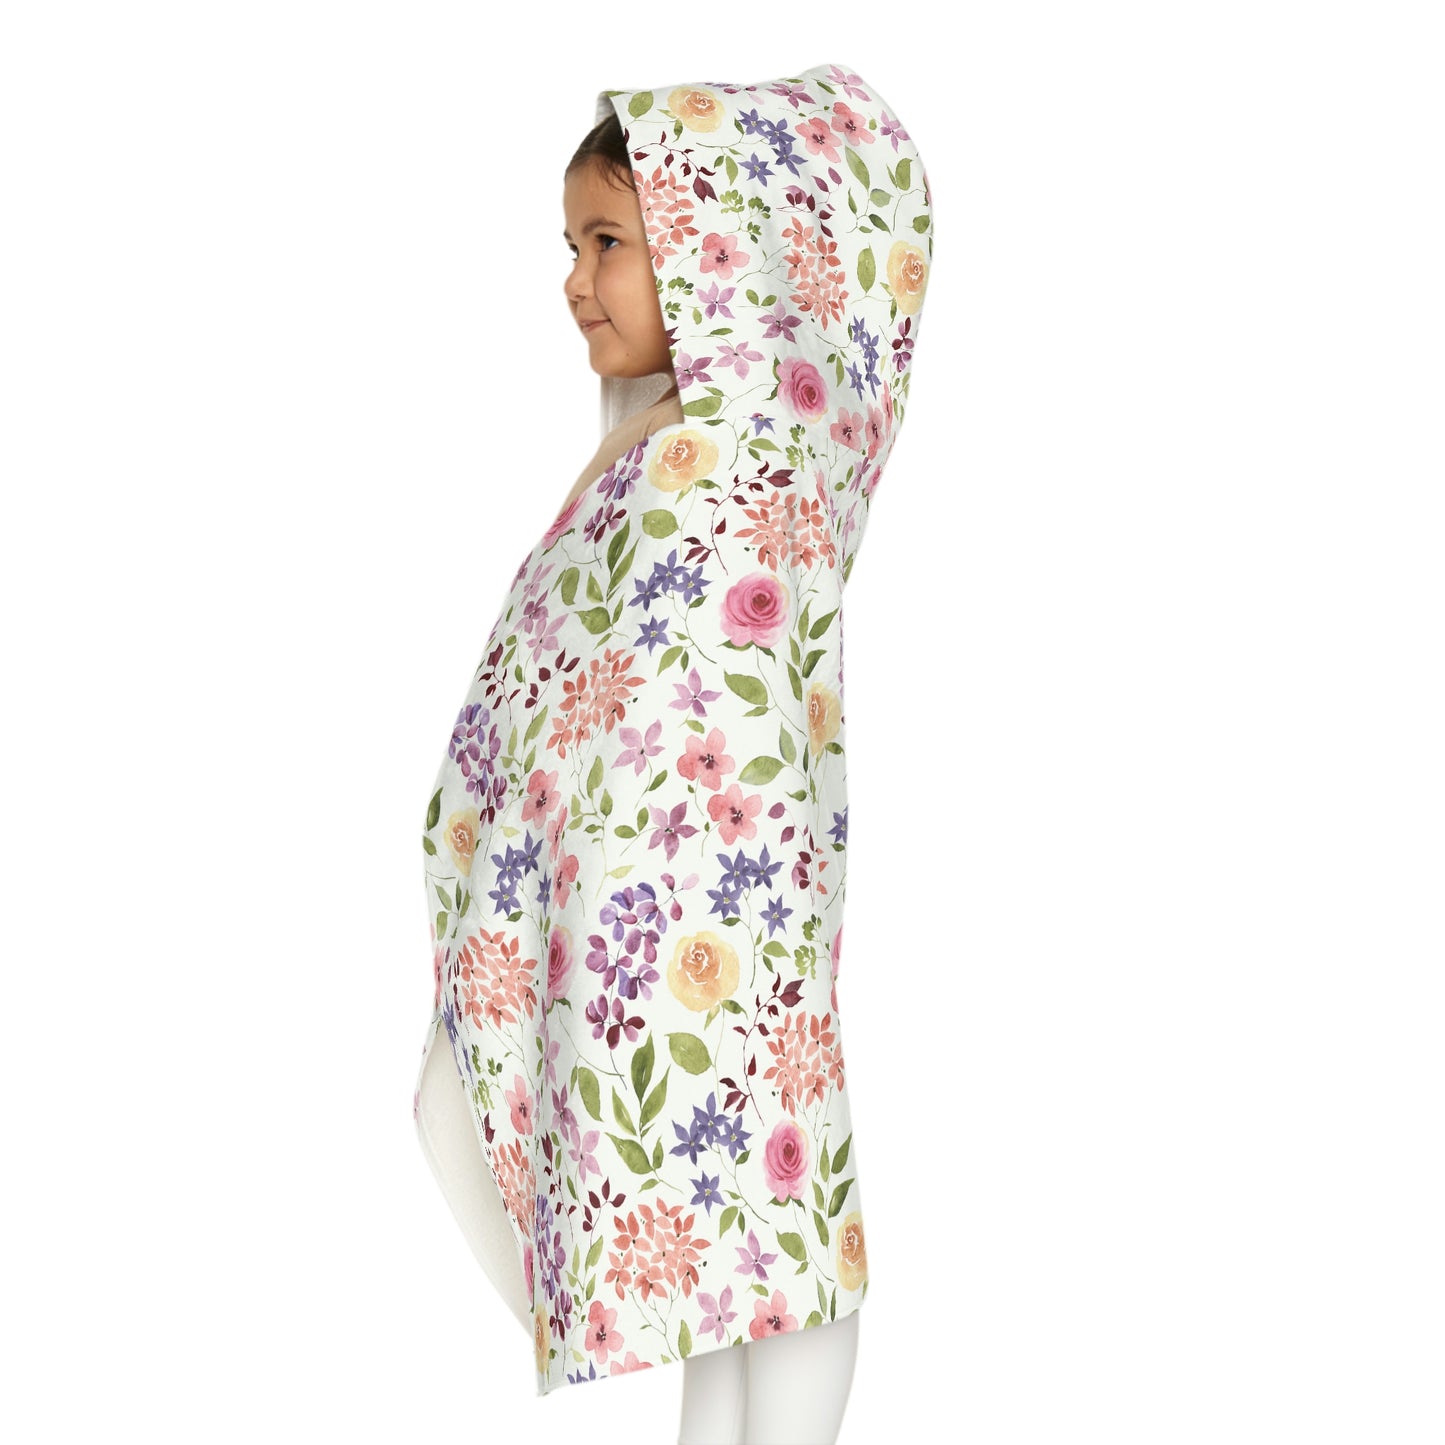 Yellow and Pink Roses Youth Hooded Towel